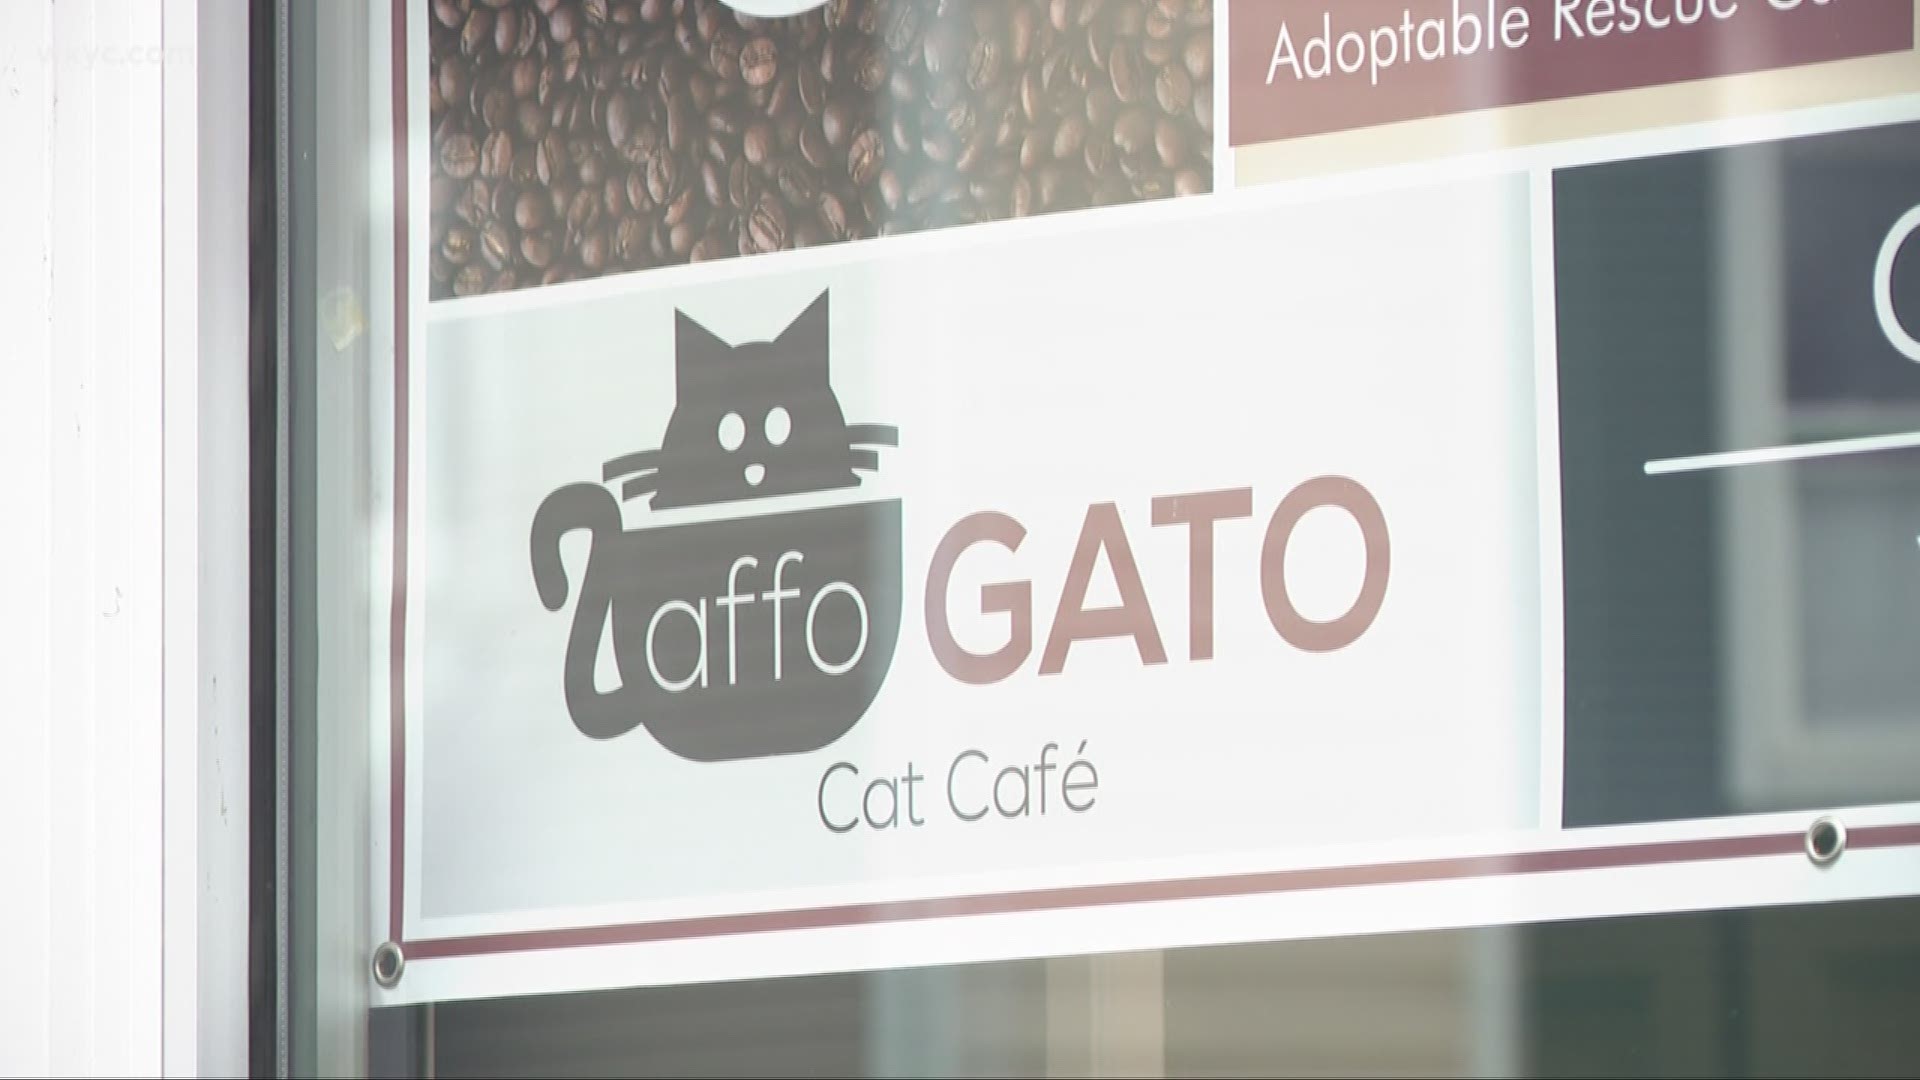 Jan. 3, 2019: We get a peek inside the new affoGATO Cat Cafe, which is now open in Cleveland's Tremont neighborhood. Among the features is an ice cream stand.